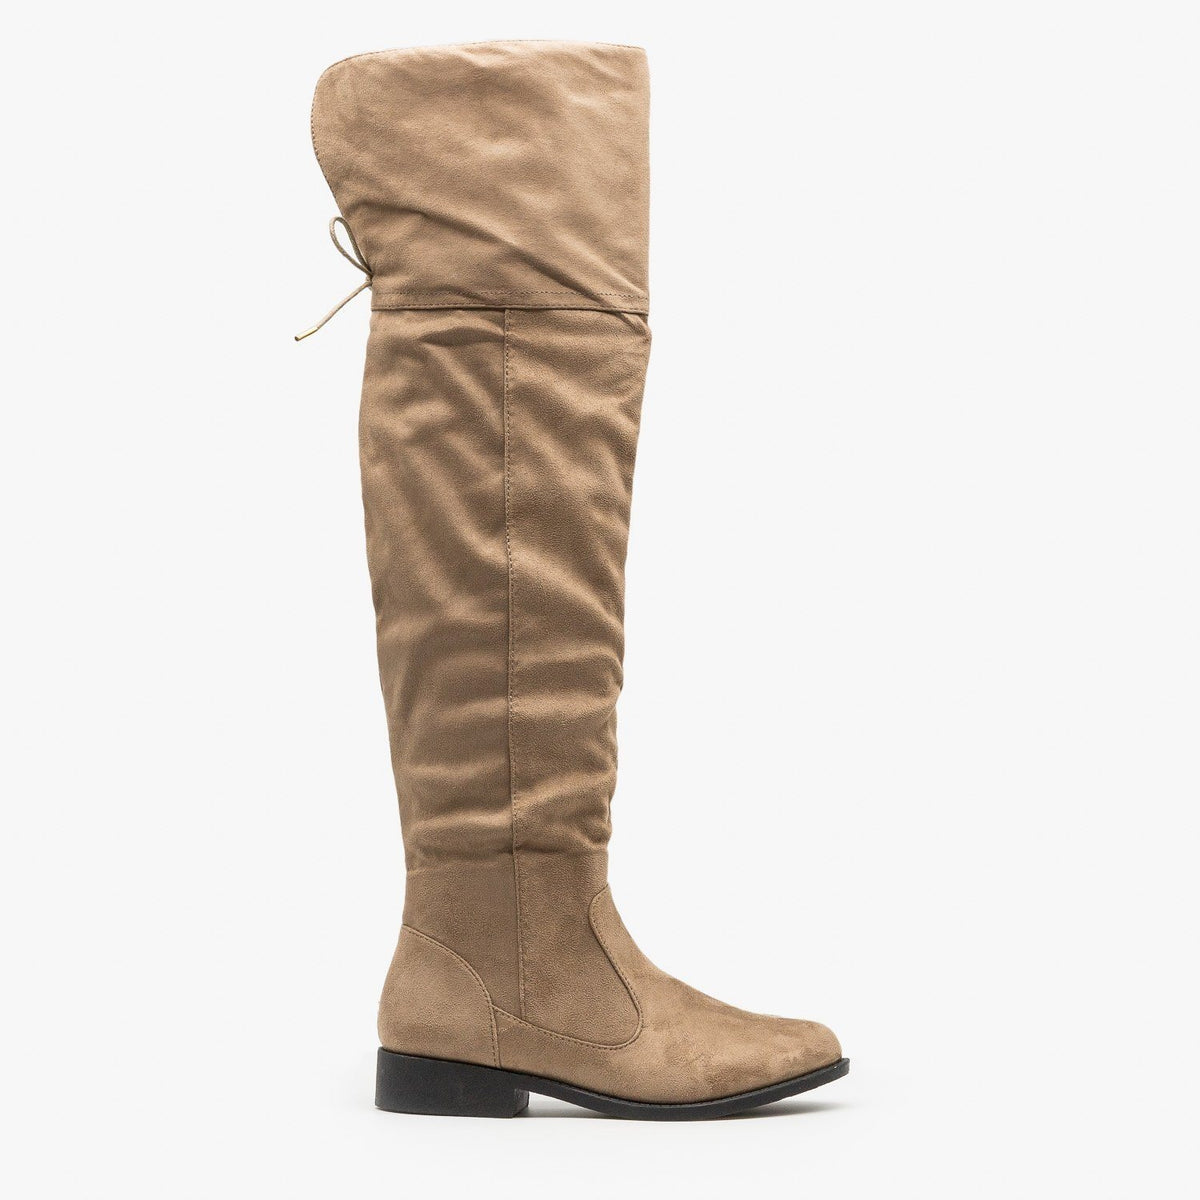 Over the Knee Riding Boots - Qupid 